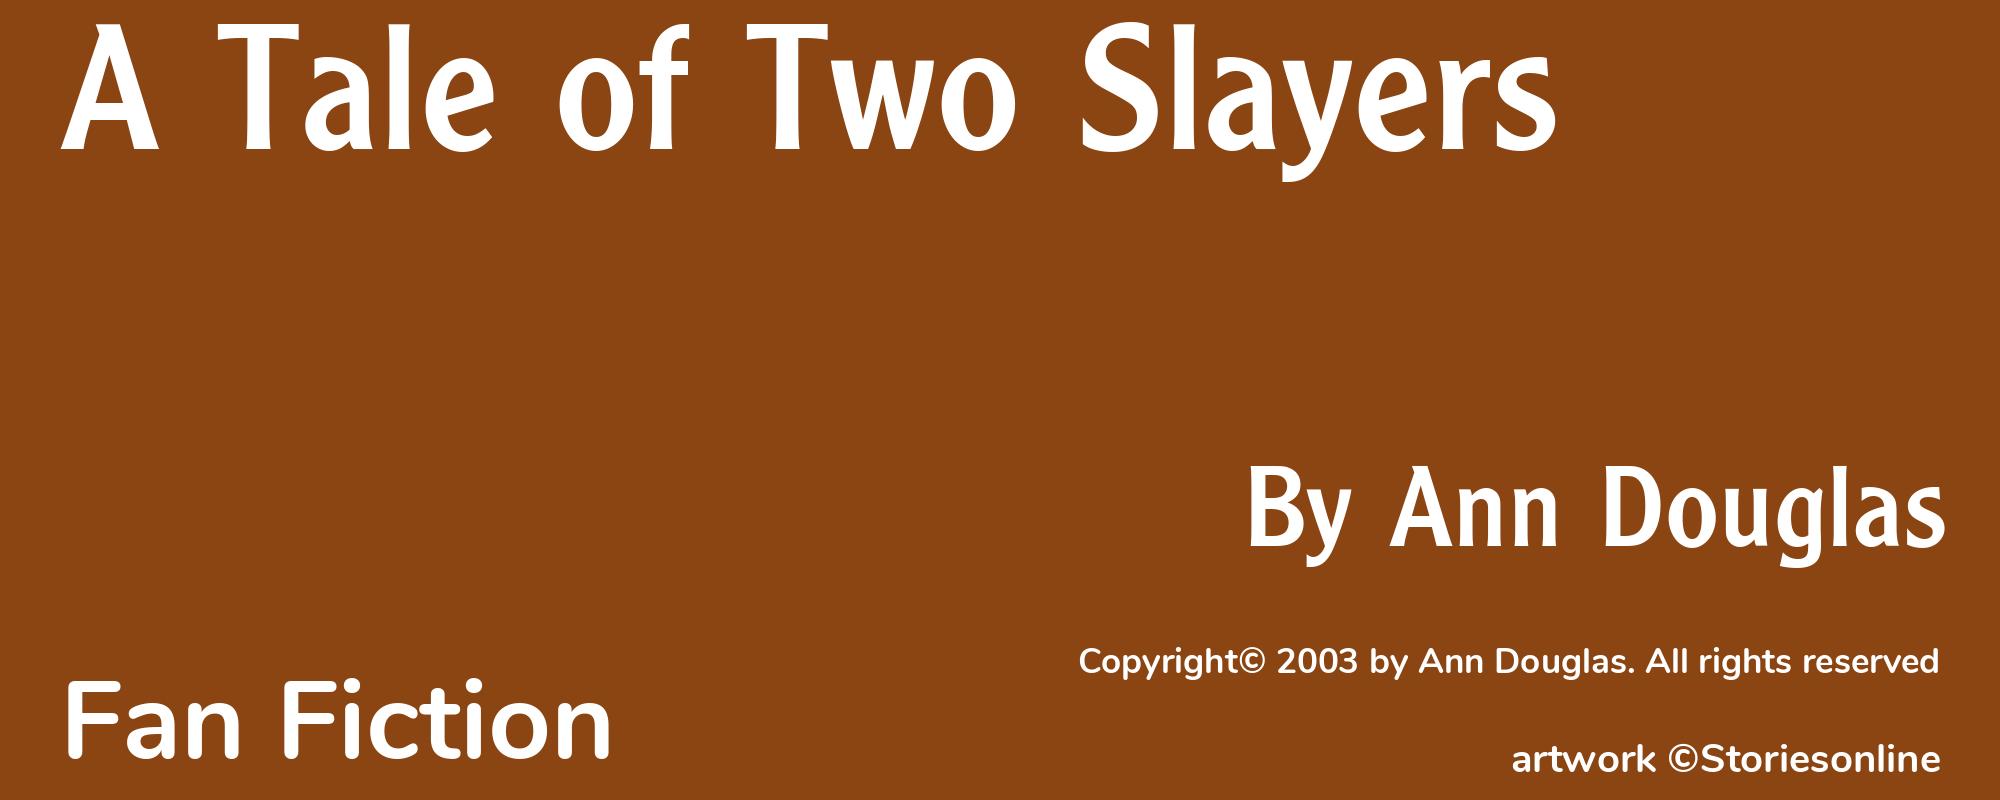 A Tale of Two Slayers - Cover